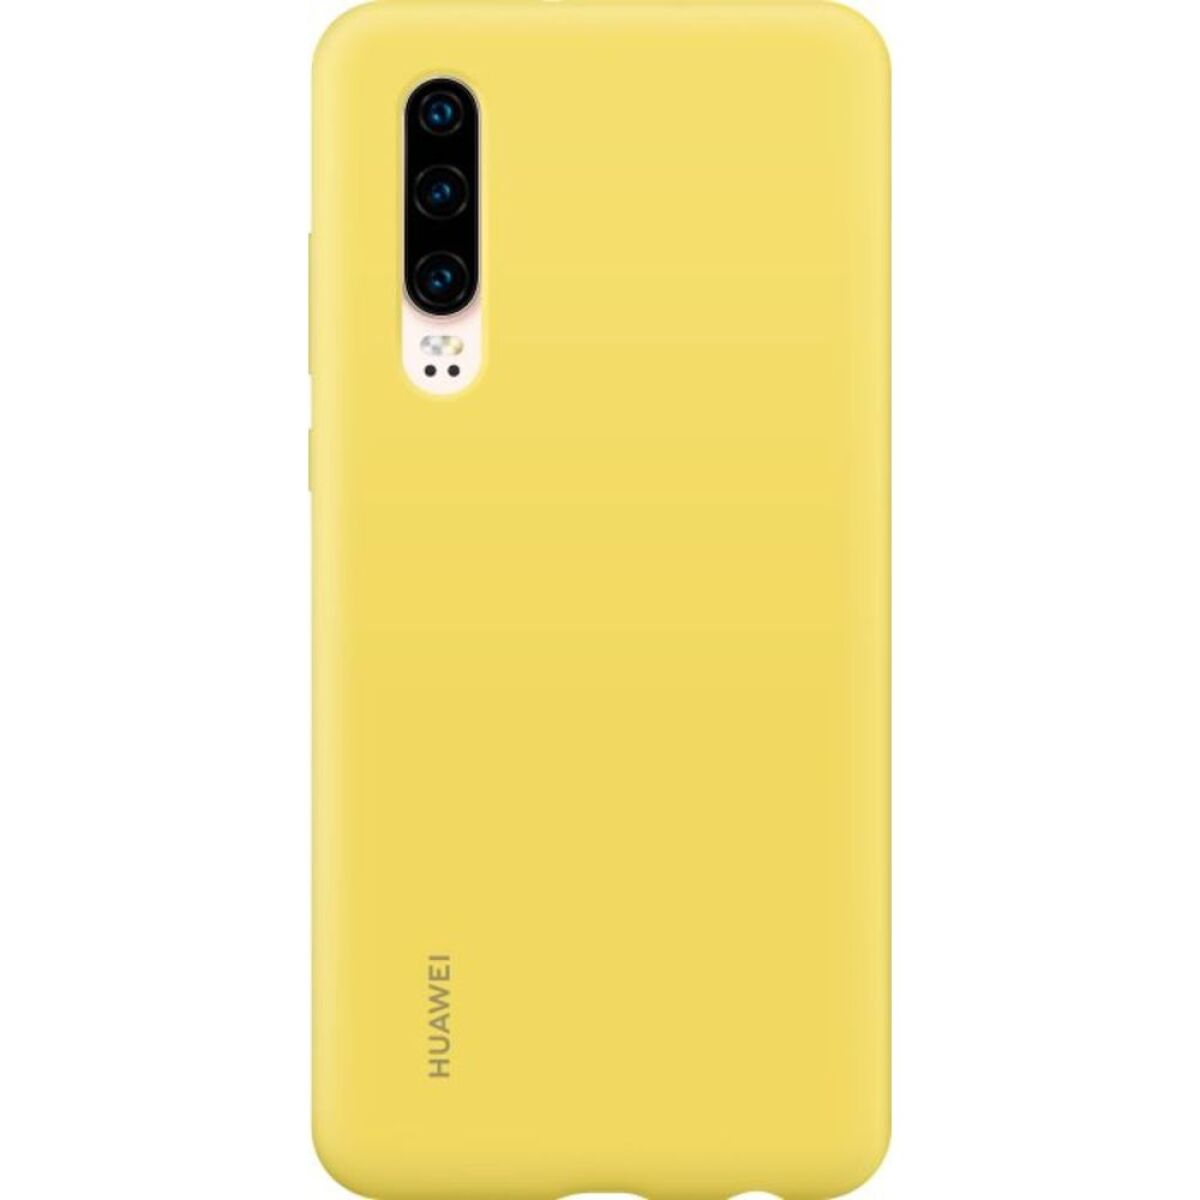 HUAWEI Case Huawei, P30, Silicon yellow, P30 Gelb Bookcover,